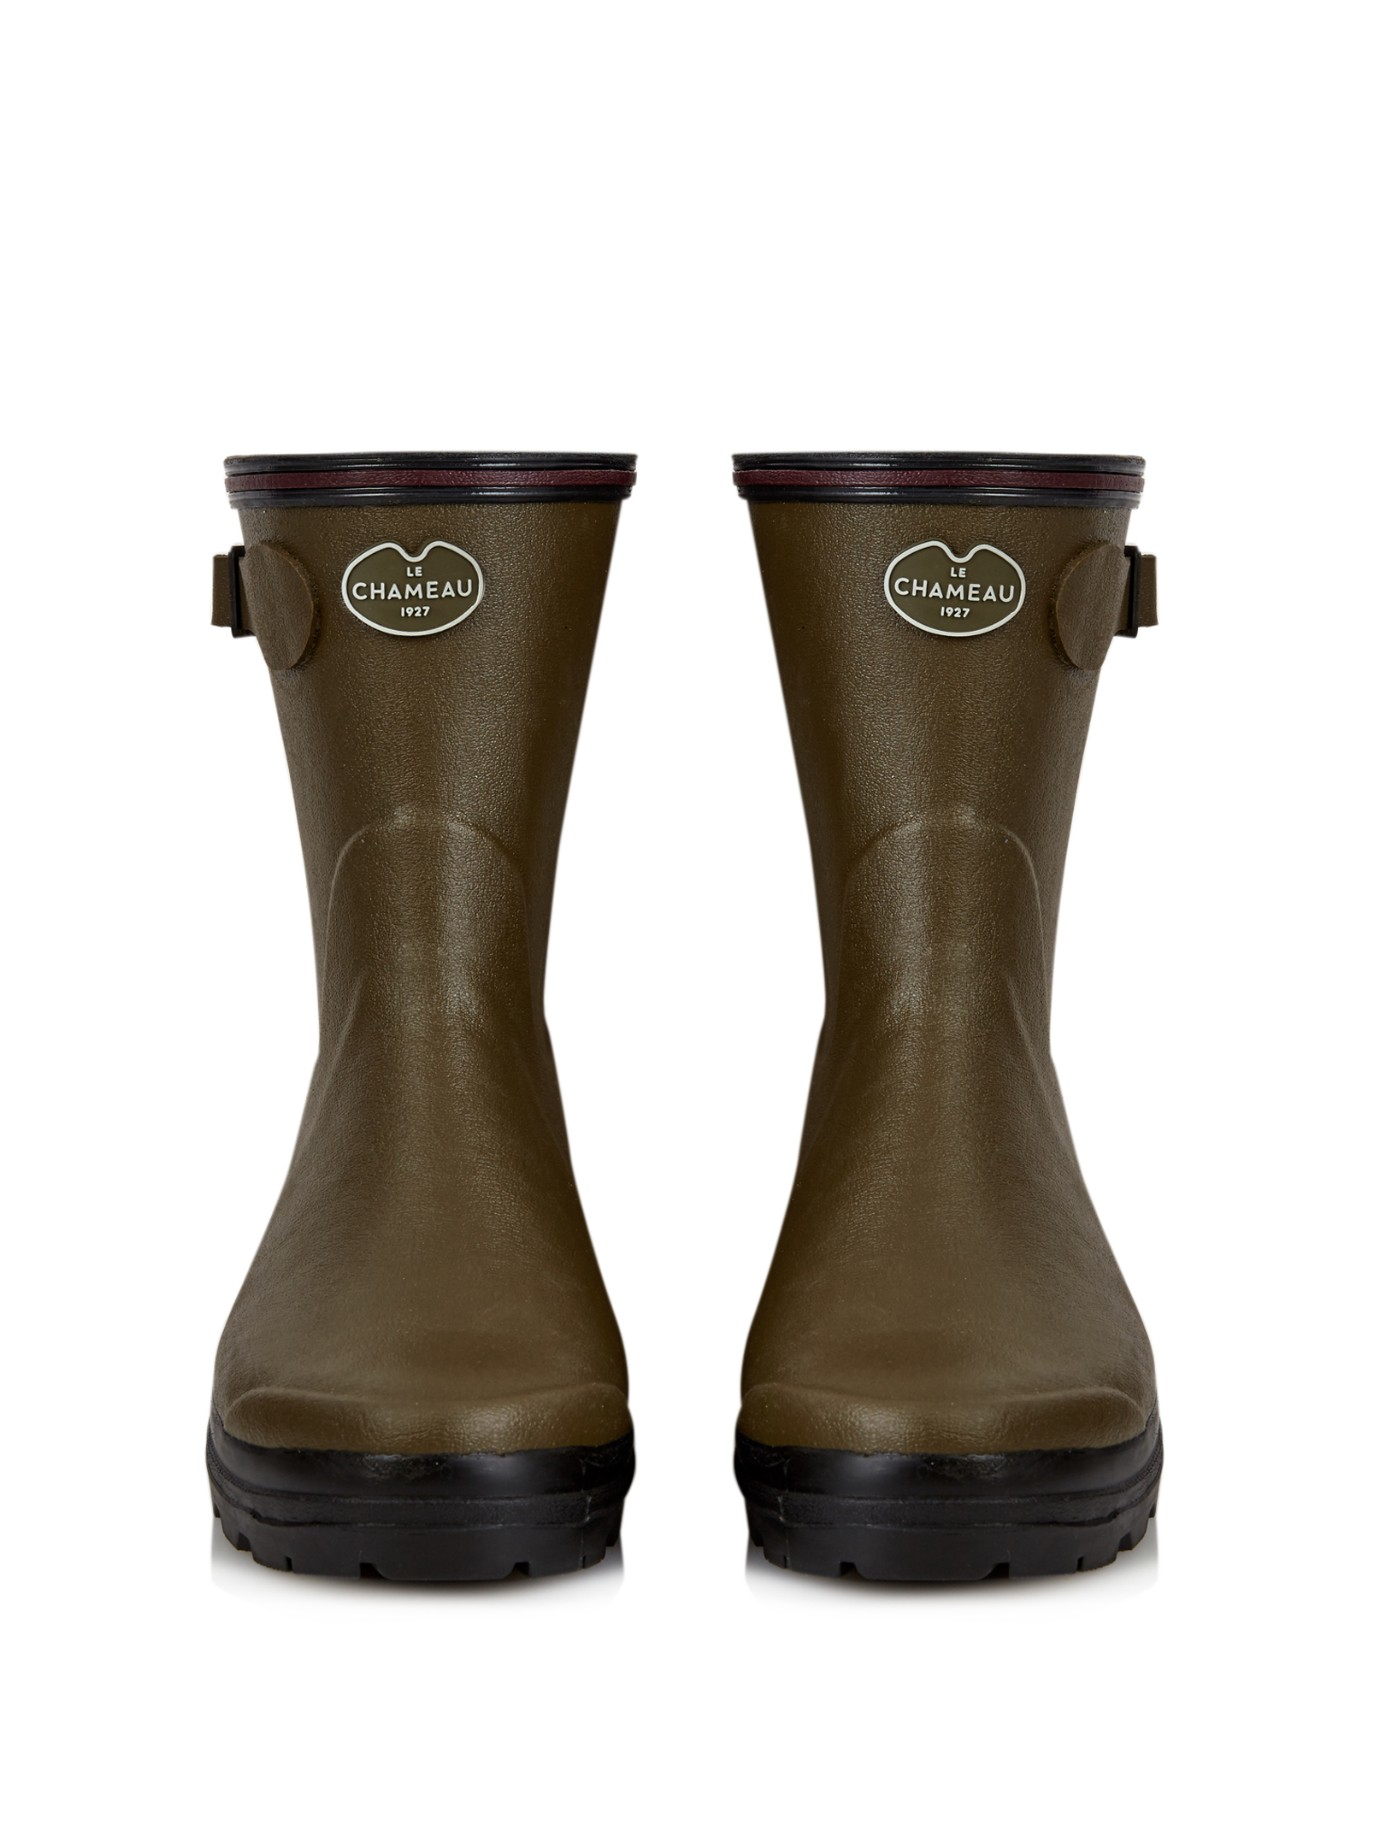 Le Chameau Giverny Low Rubber Boots in Green | Lyst